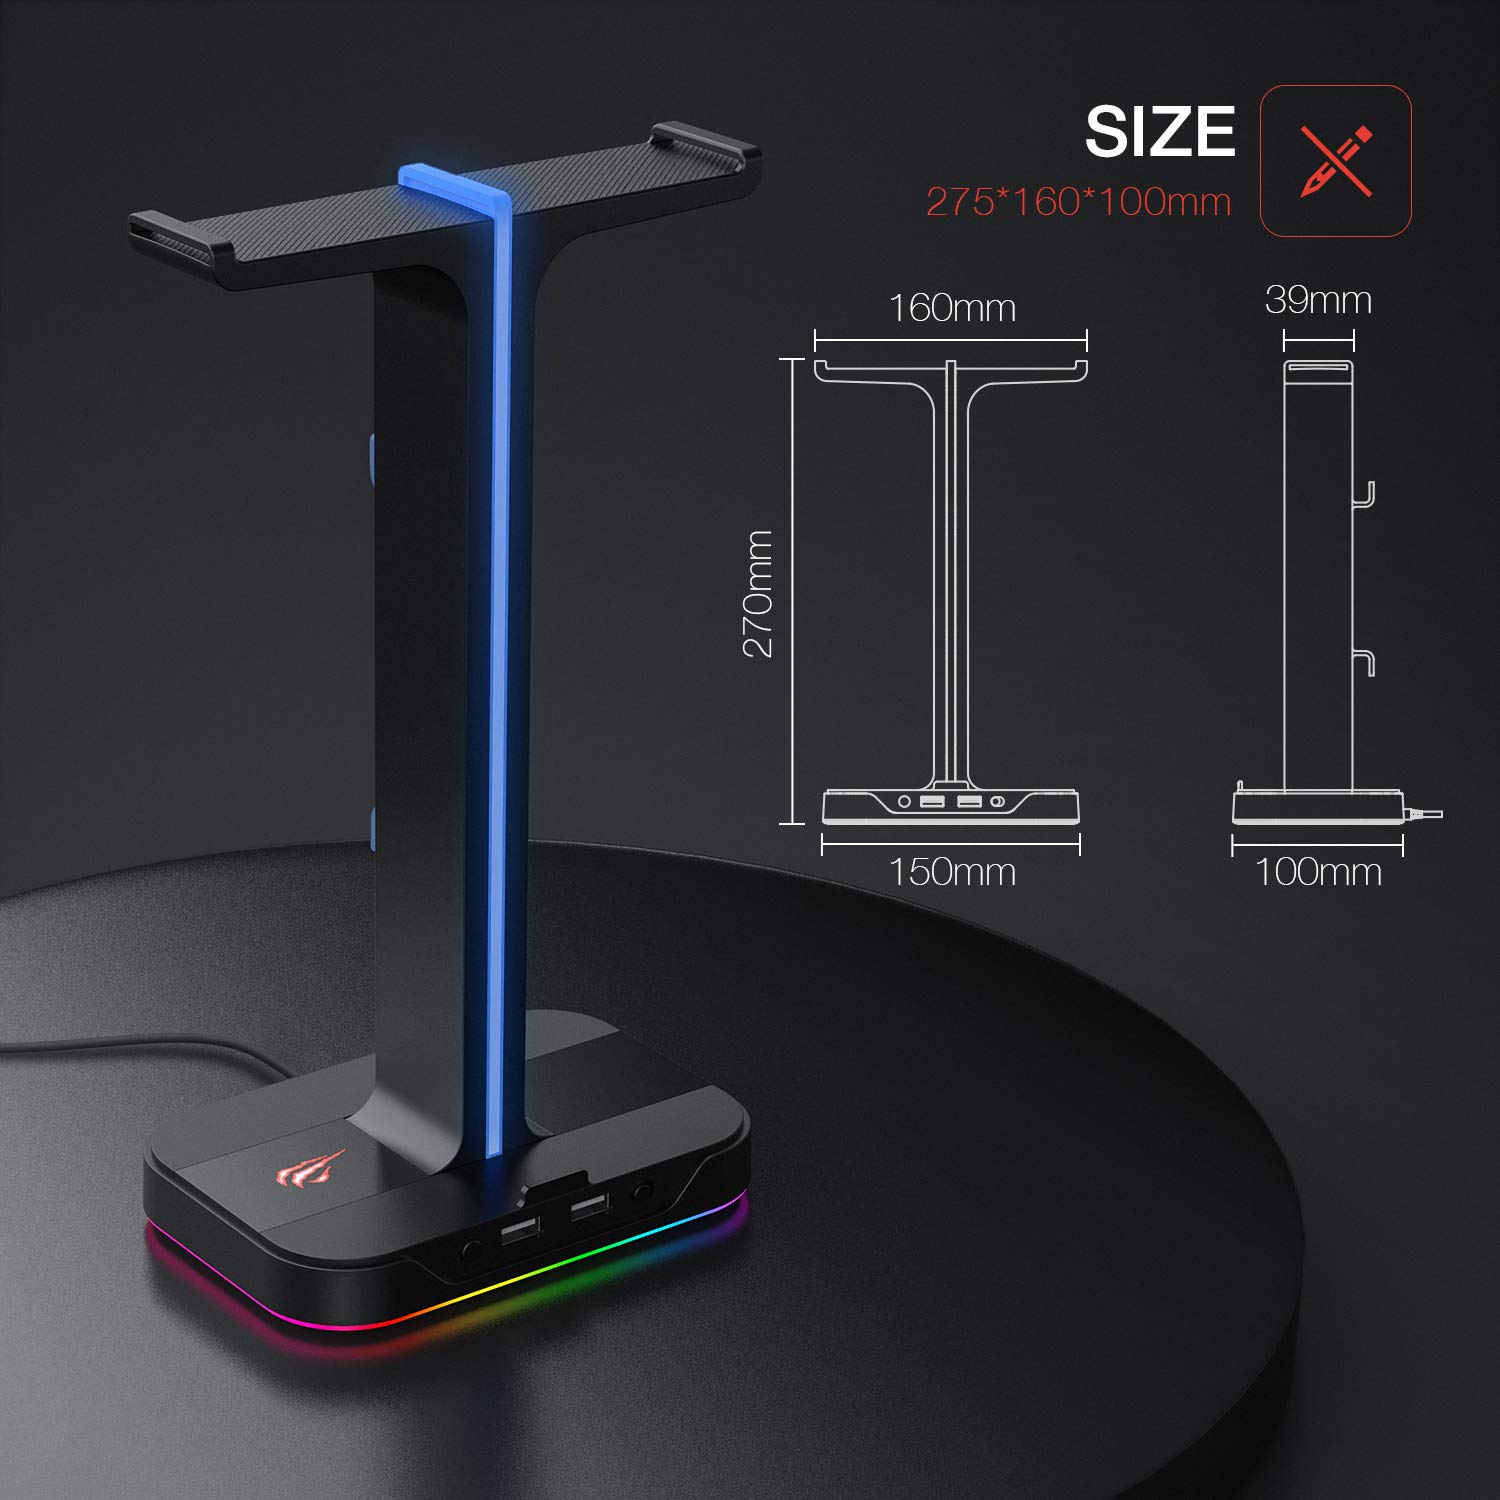 havit RGB Gaming Headphone Stand Desk Dual Headset Hanger Base with Phone Holder & 2 USB Ports for Desktop PC Game Earphone Accessories